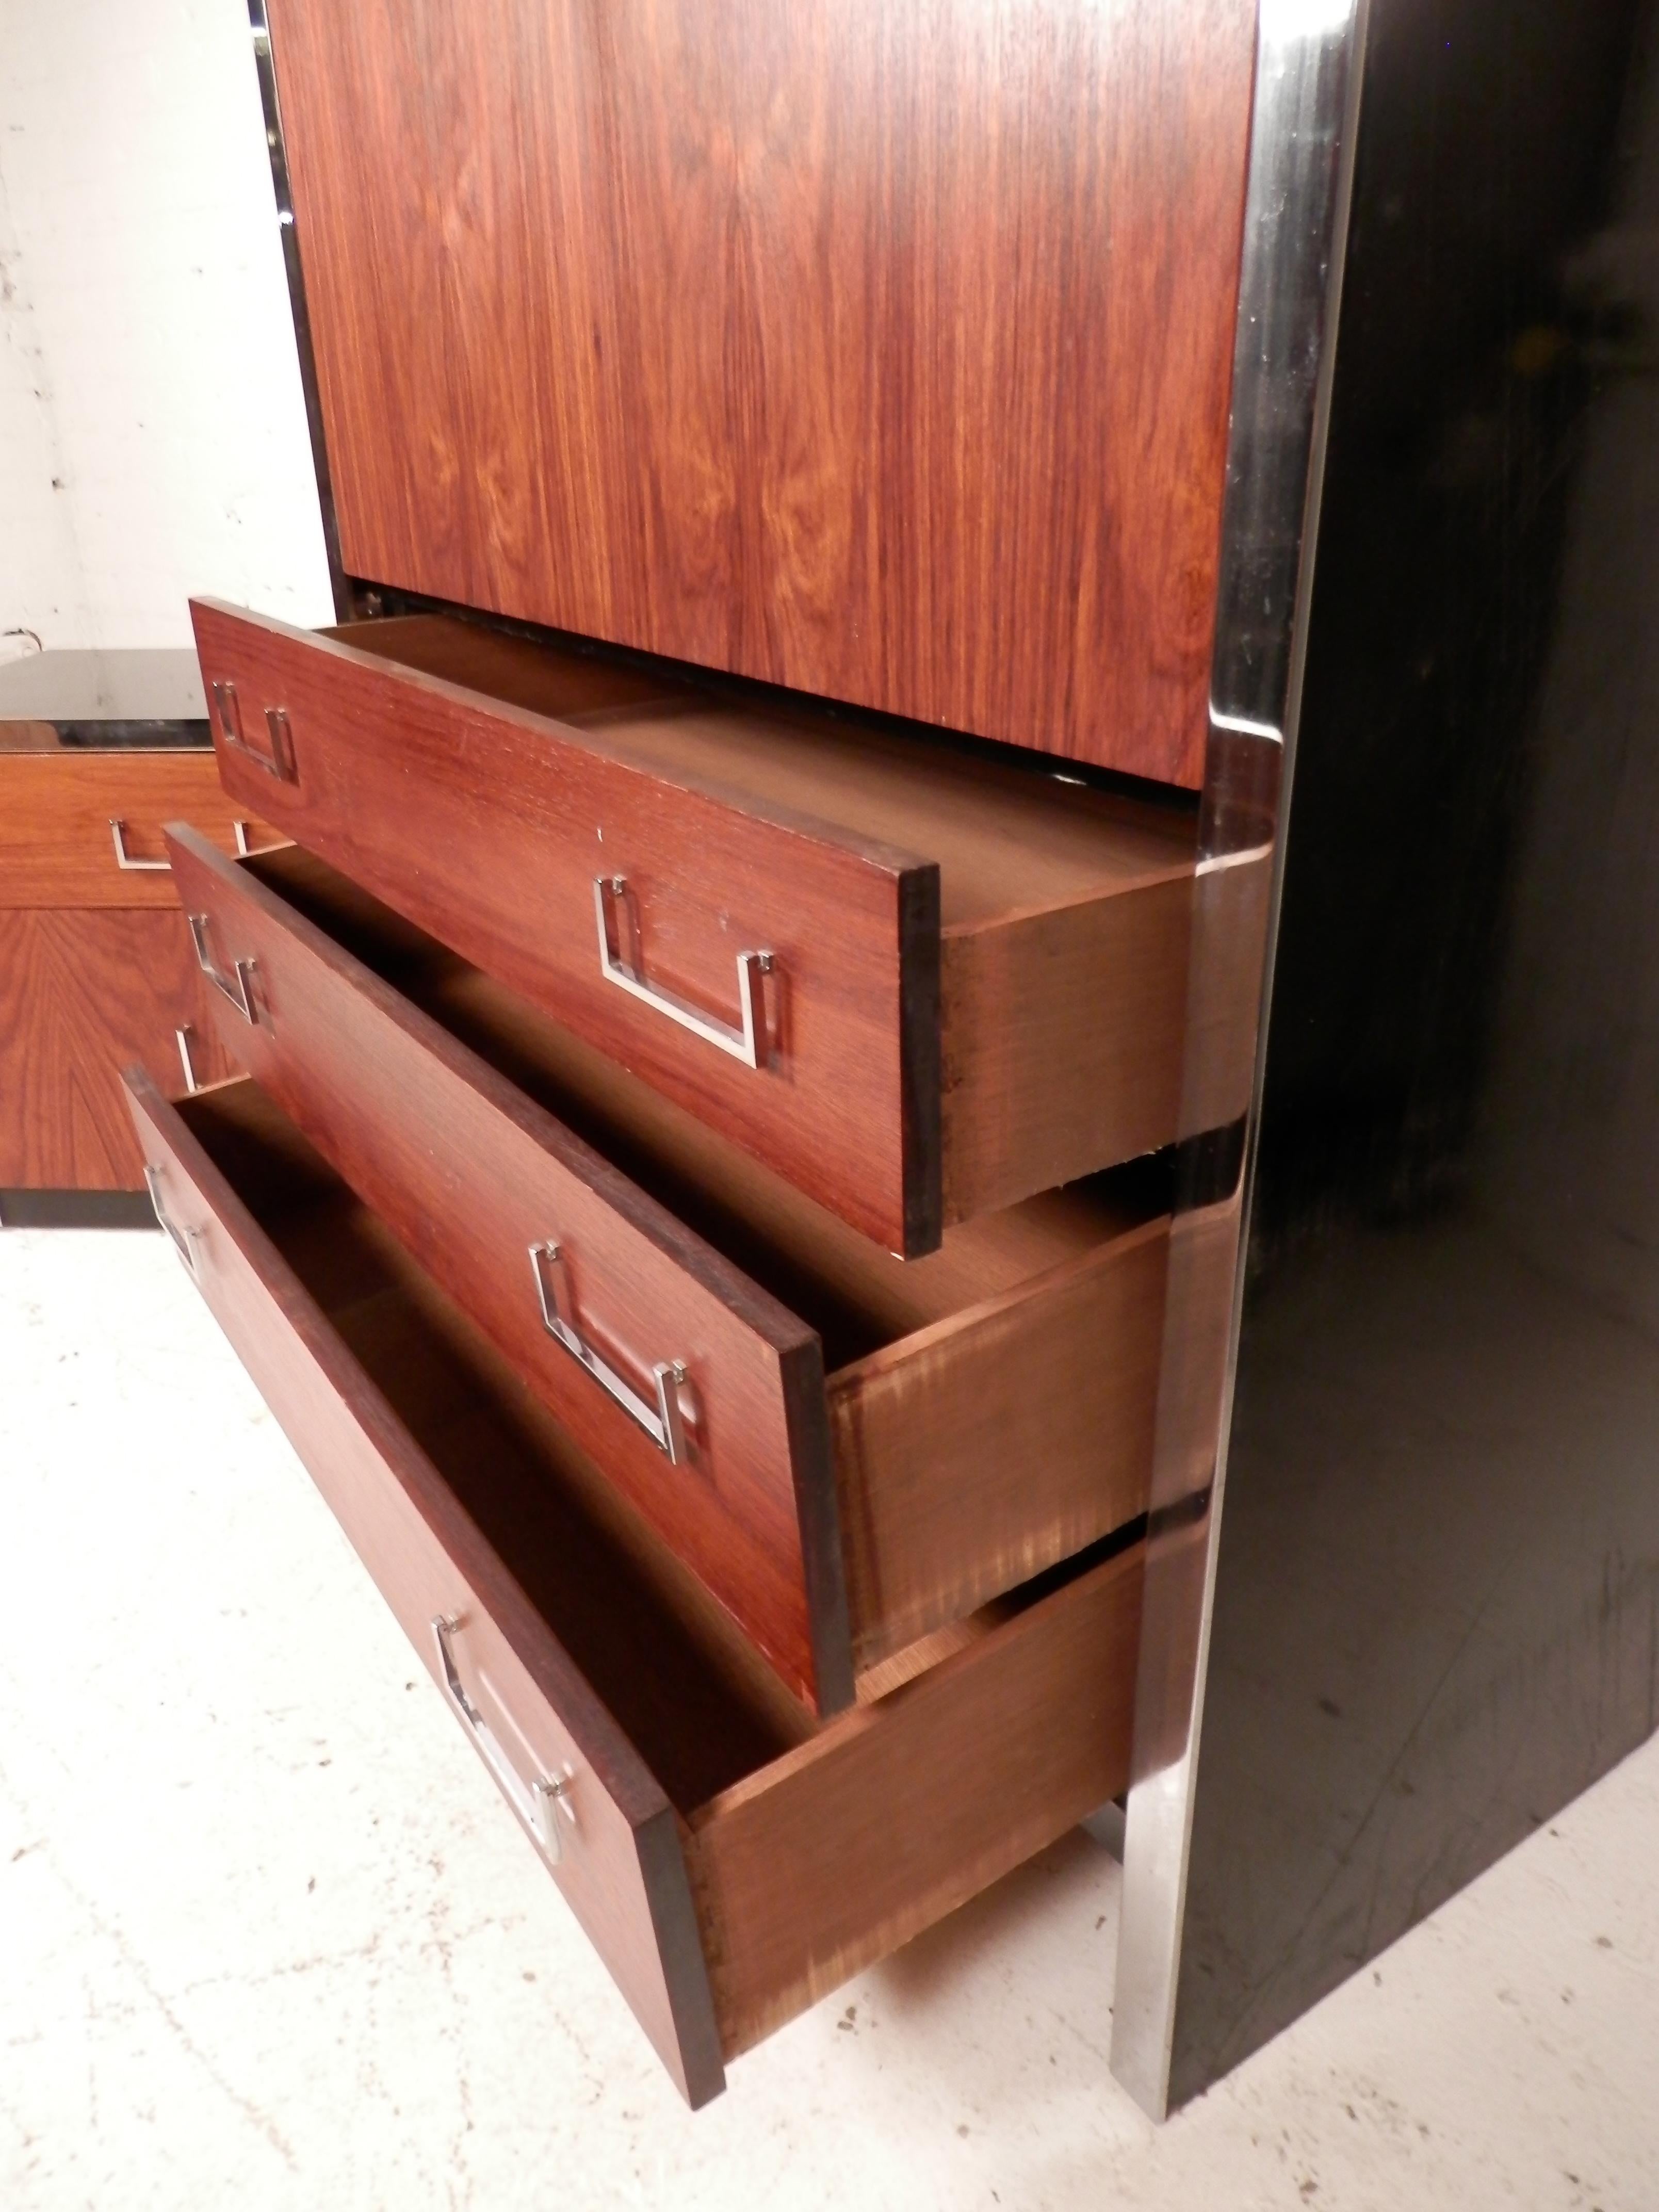 Tall Mid-Century Modern cabinet with rich rosewood veneer and polished chrome accents. Part of the 3500 series from West Michigan Furniture's Dimension 1 line. Great design for modern homes.
Please confirm location.